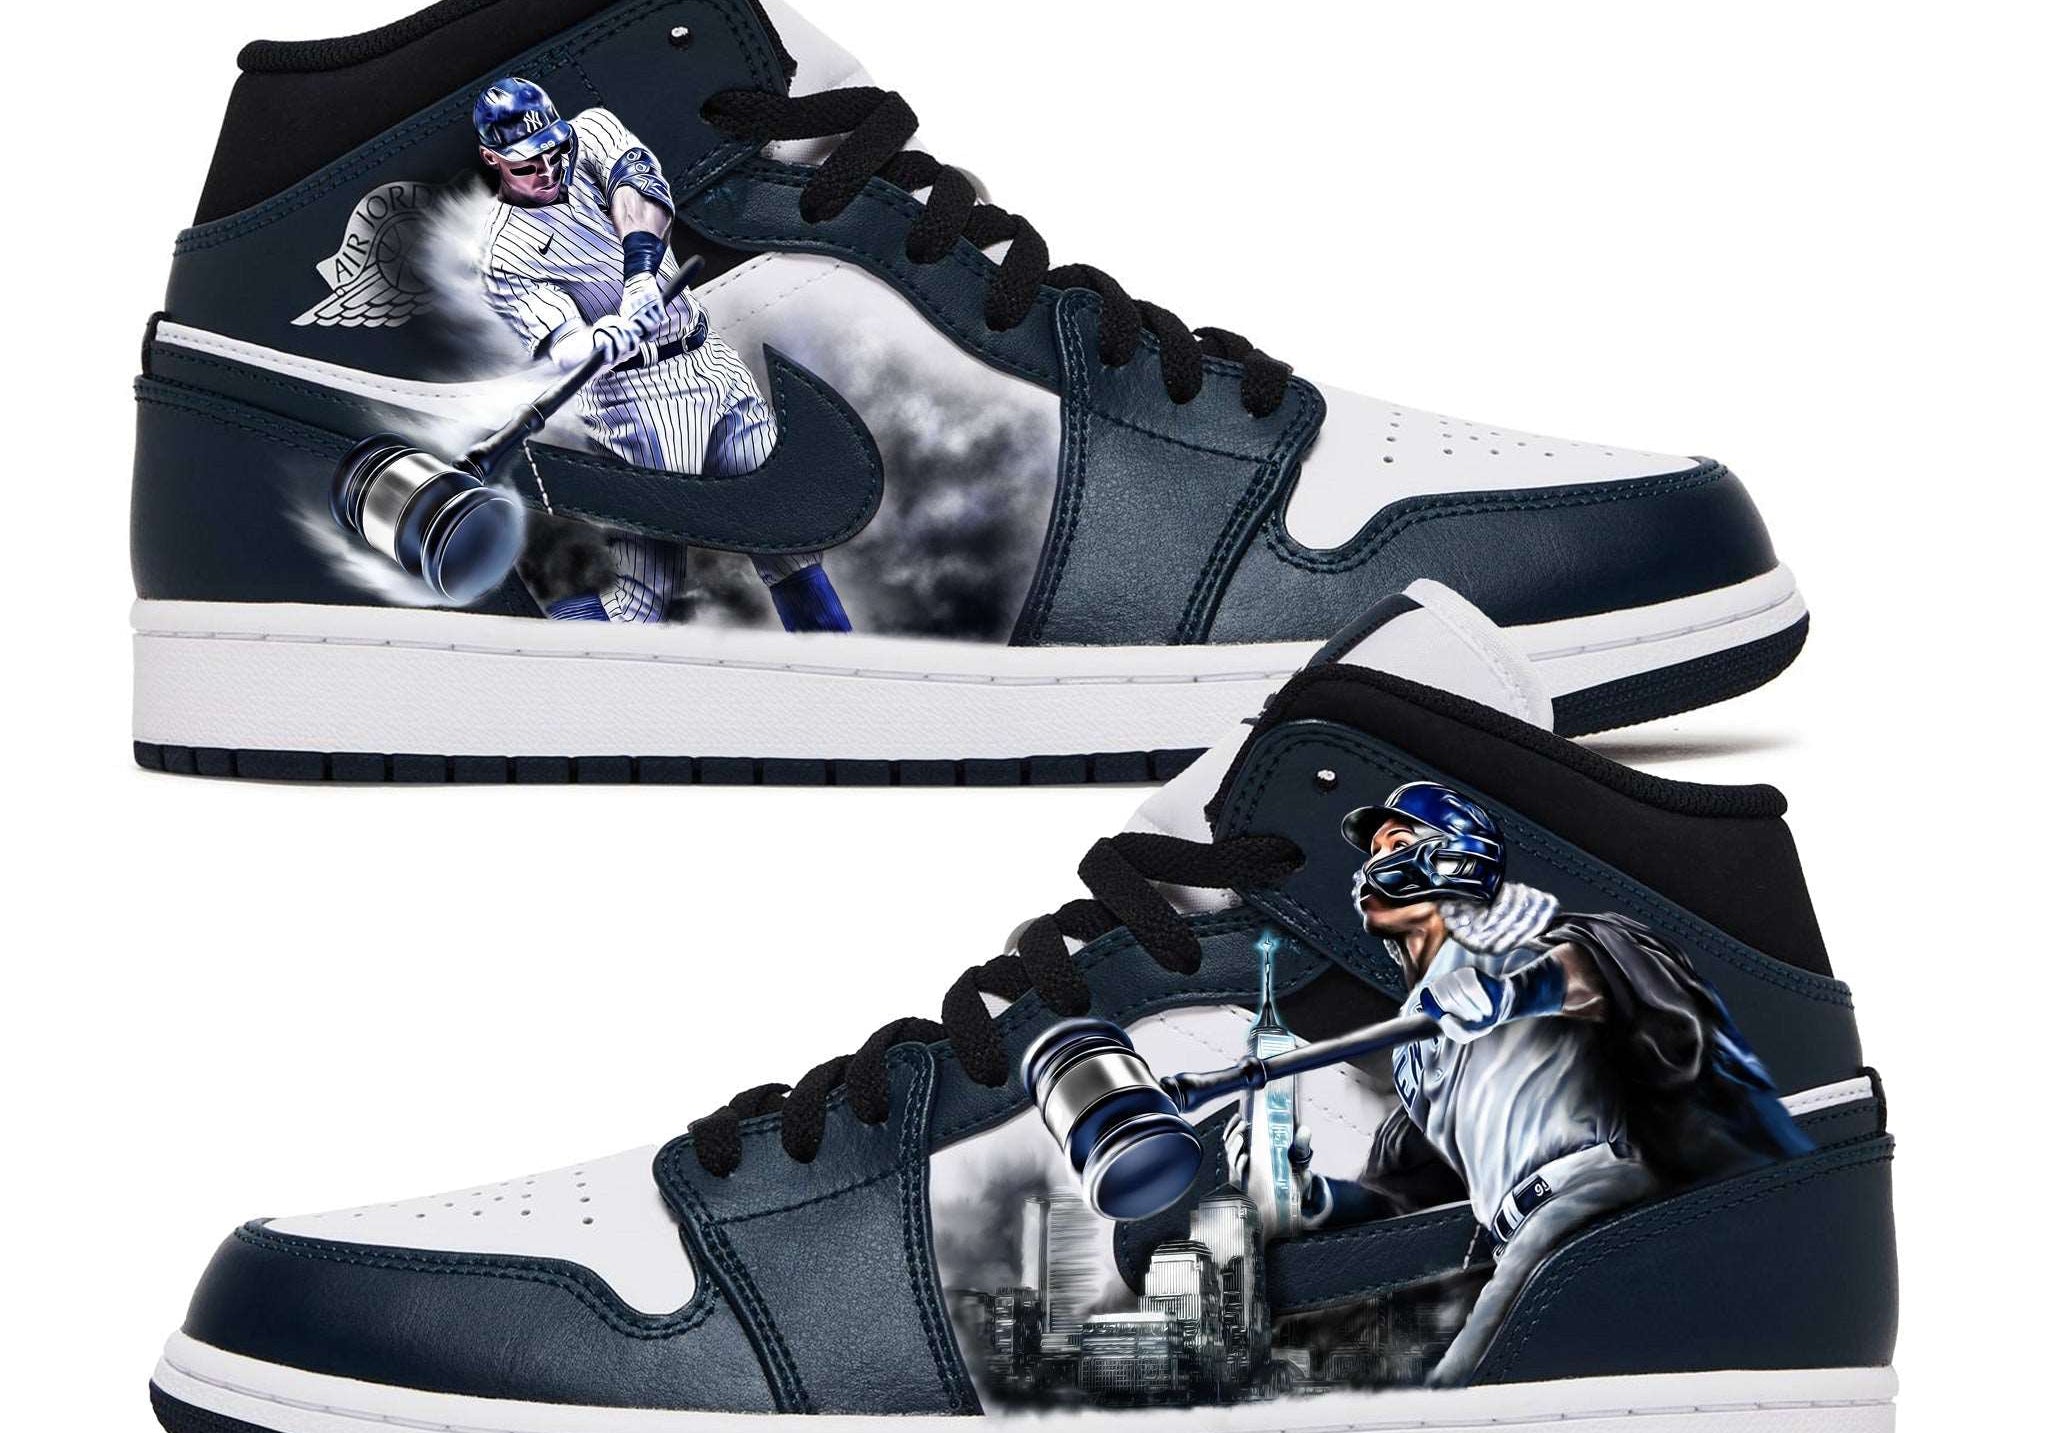 Judgement Day | Aaron Judge Nike Jordan 1 Mid Navy | LIMITED EDITION of 62 - Androo's Art